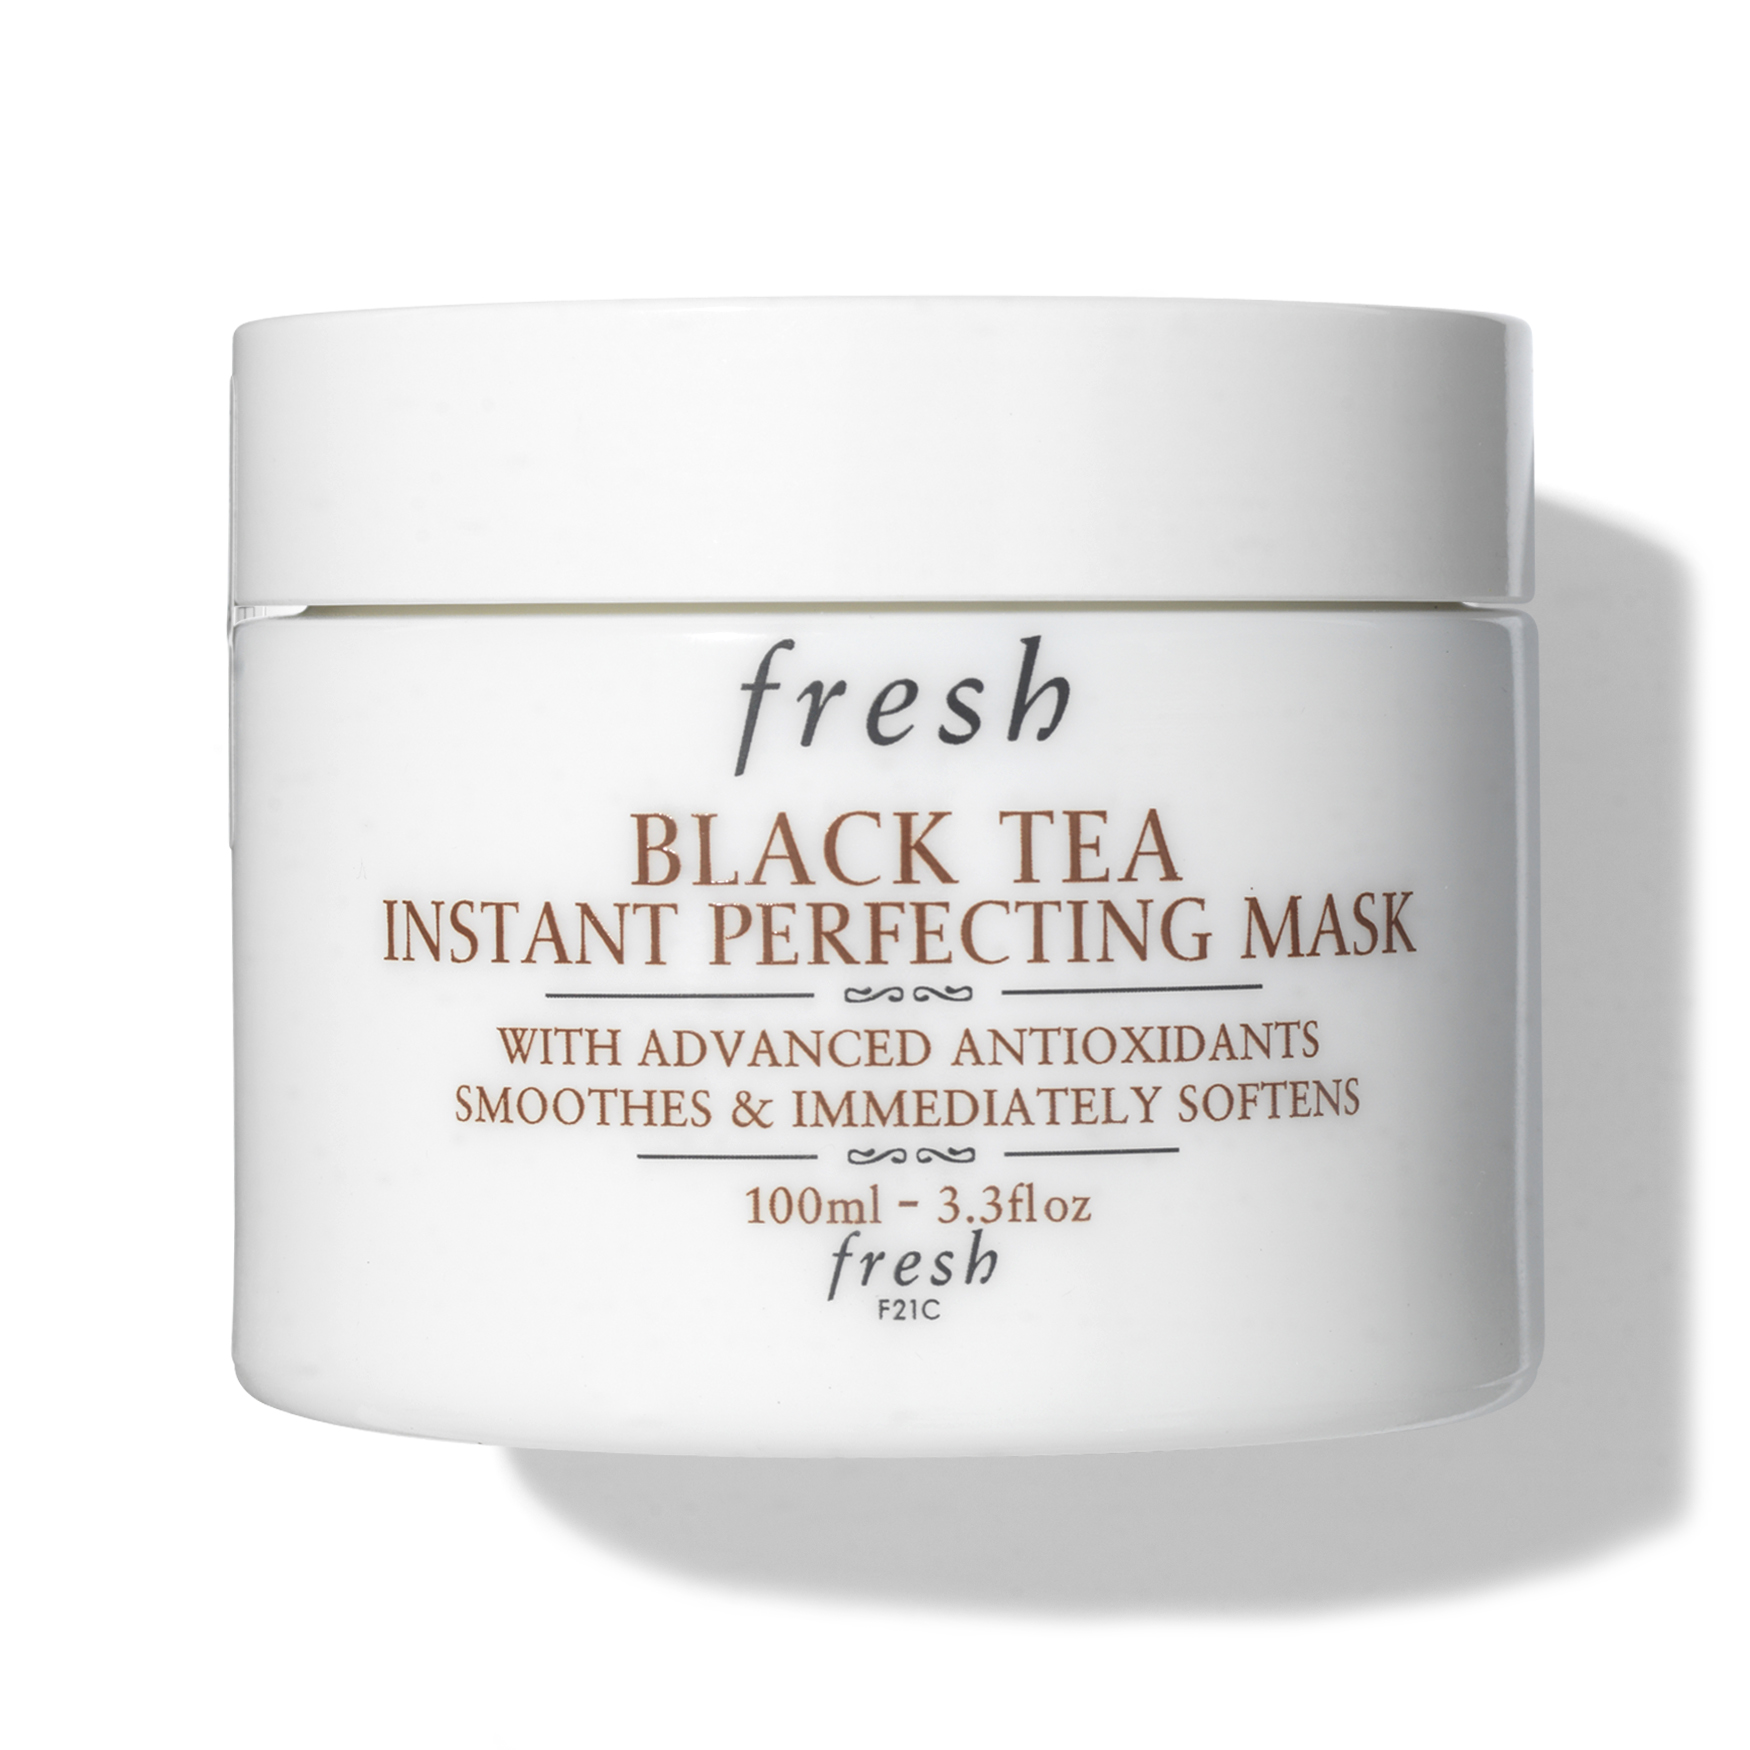 Fresh Black Tea Instant Perfecting Mask | Space NK